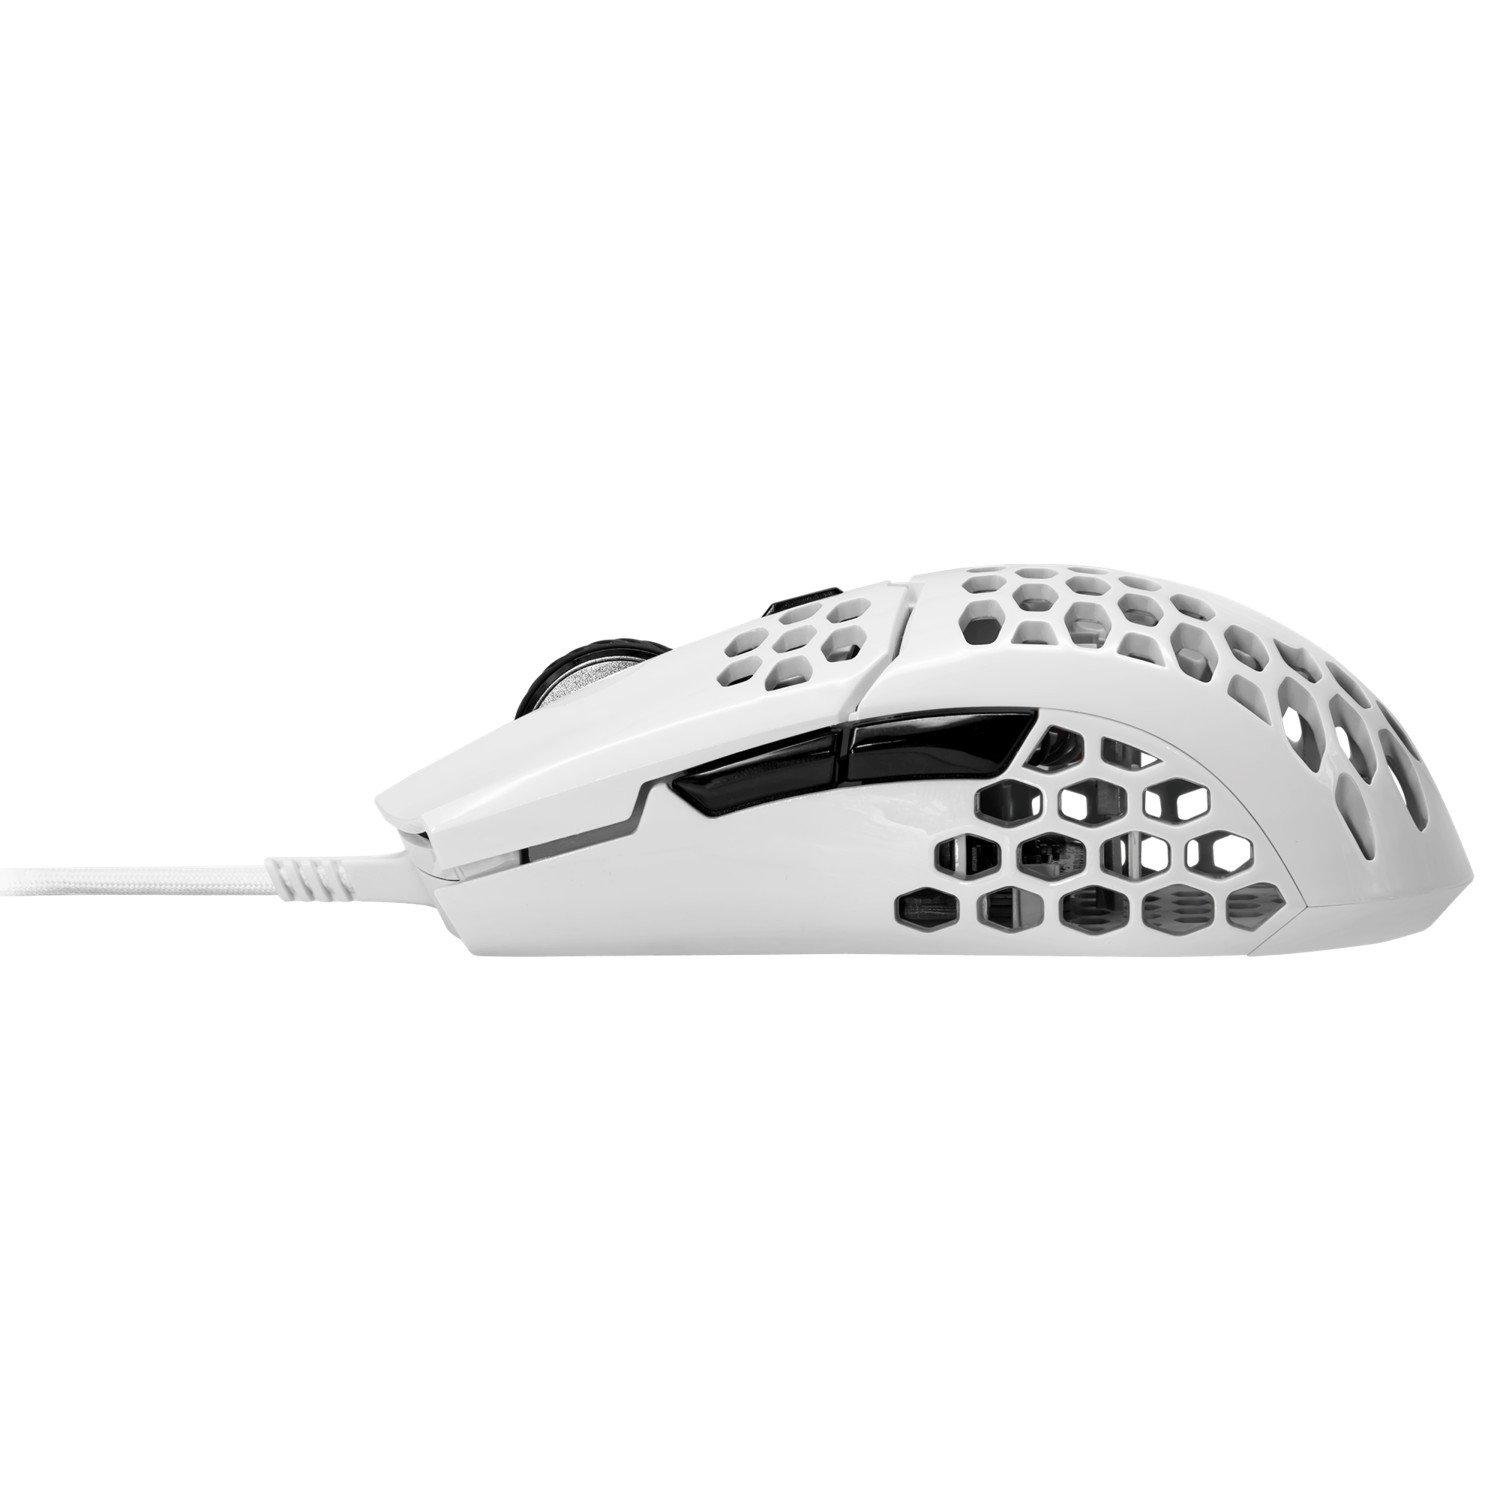 list item 5 of 6 Cooler Master MM710 Gaming Mouse